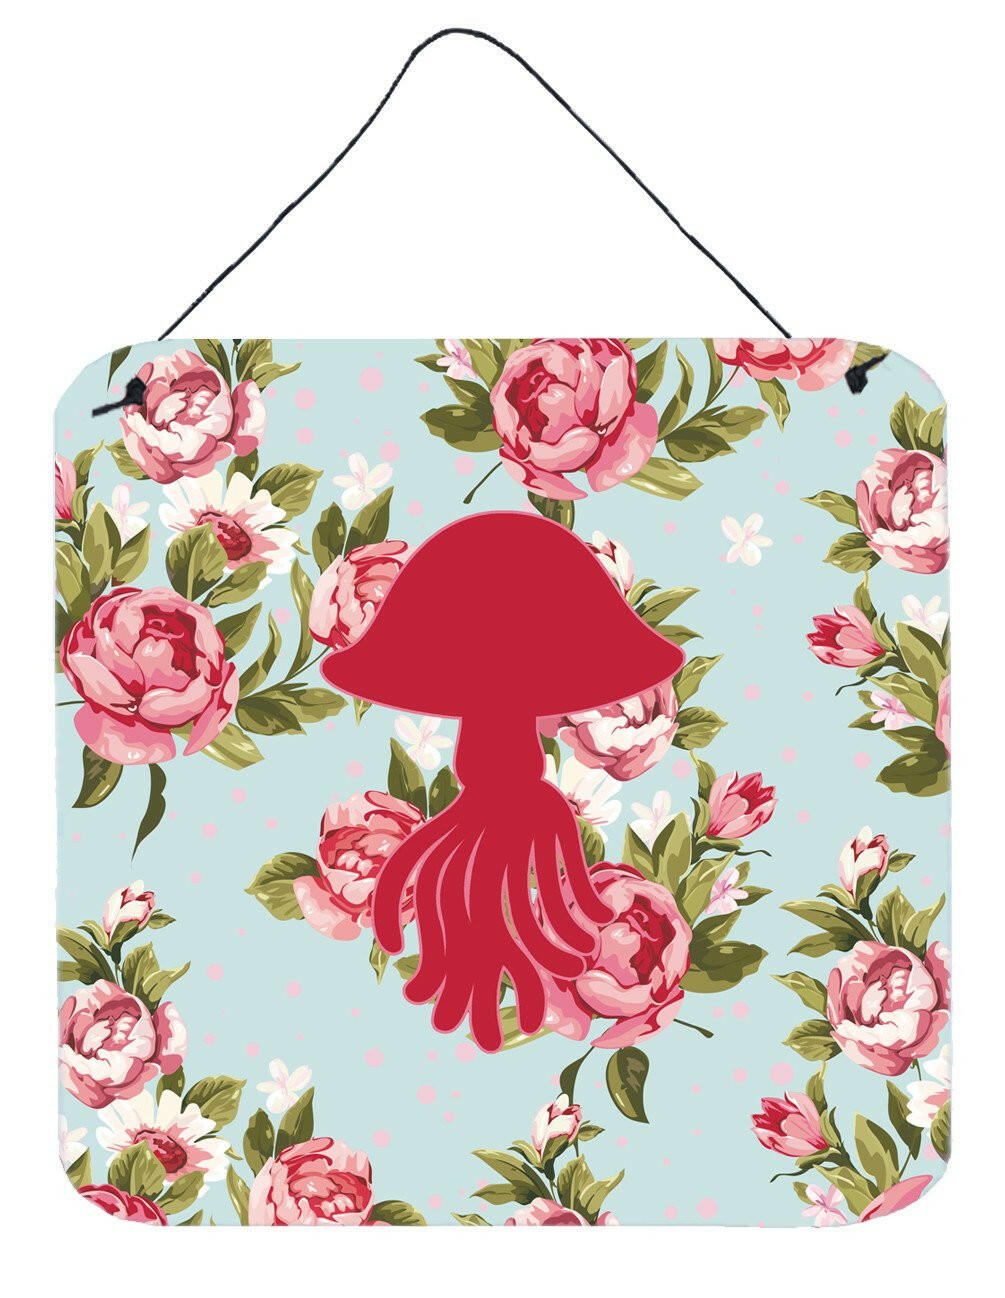 Jellyfish Shabby Chic Blue Roses Wall or Door Hanging Prints BB1089 by Caroline's Treasures